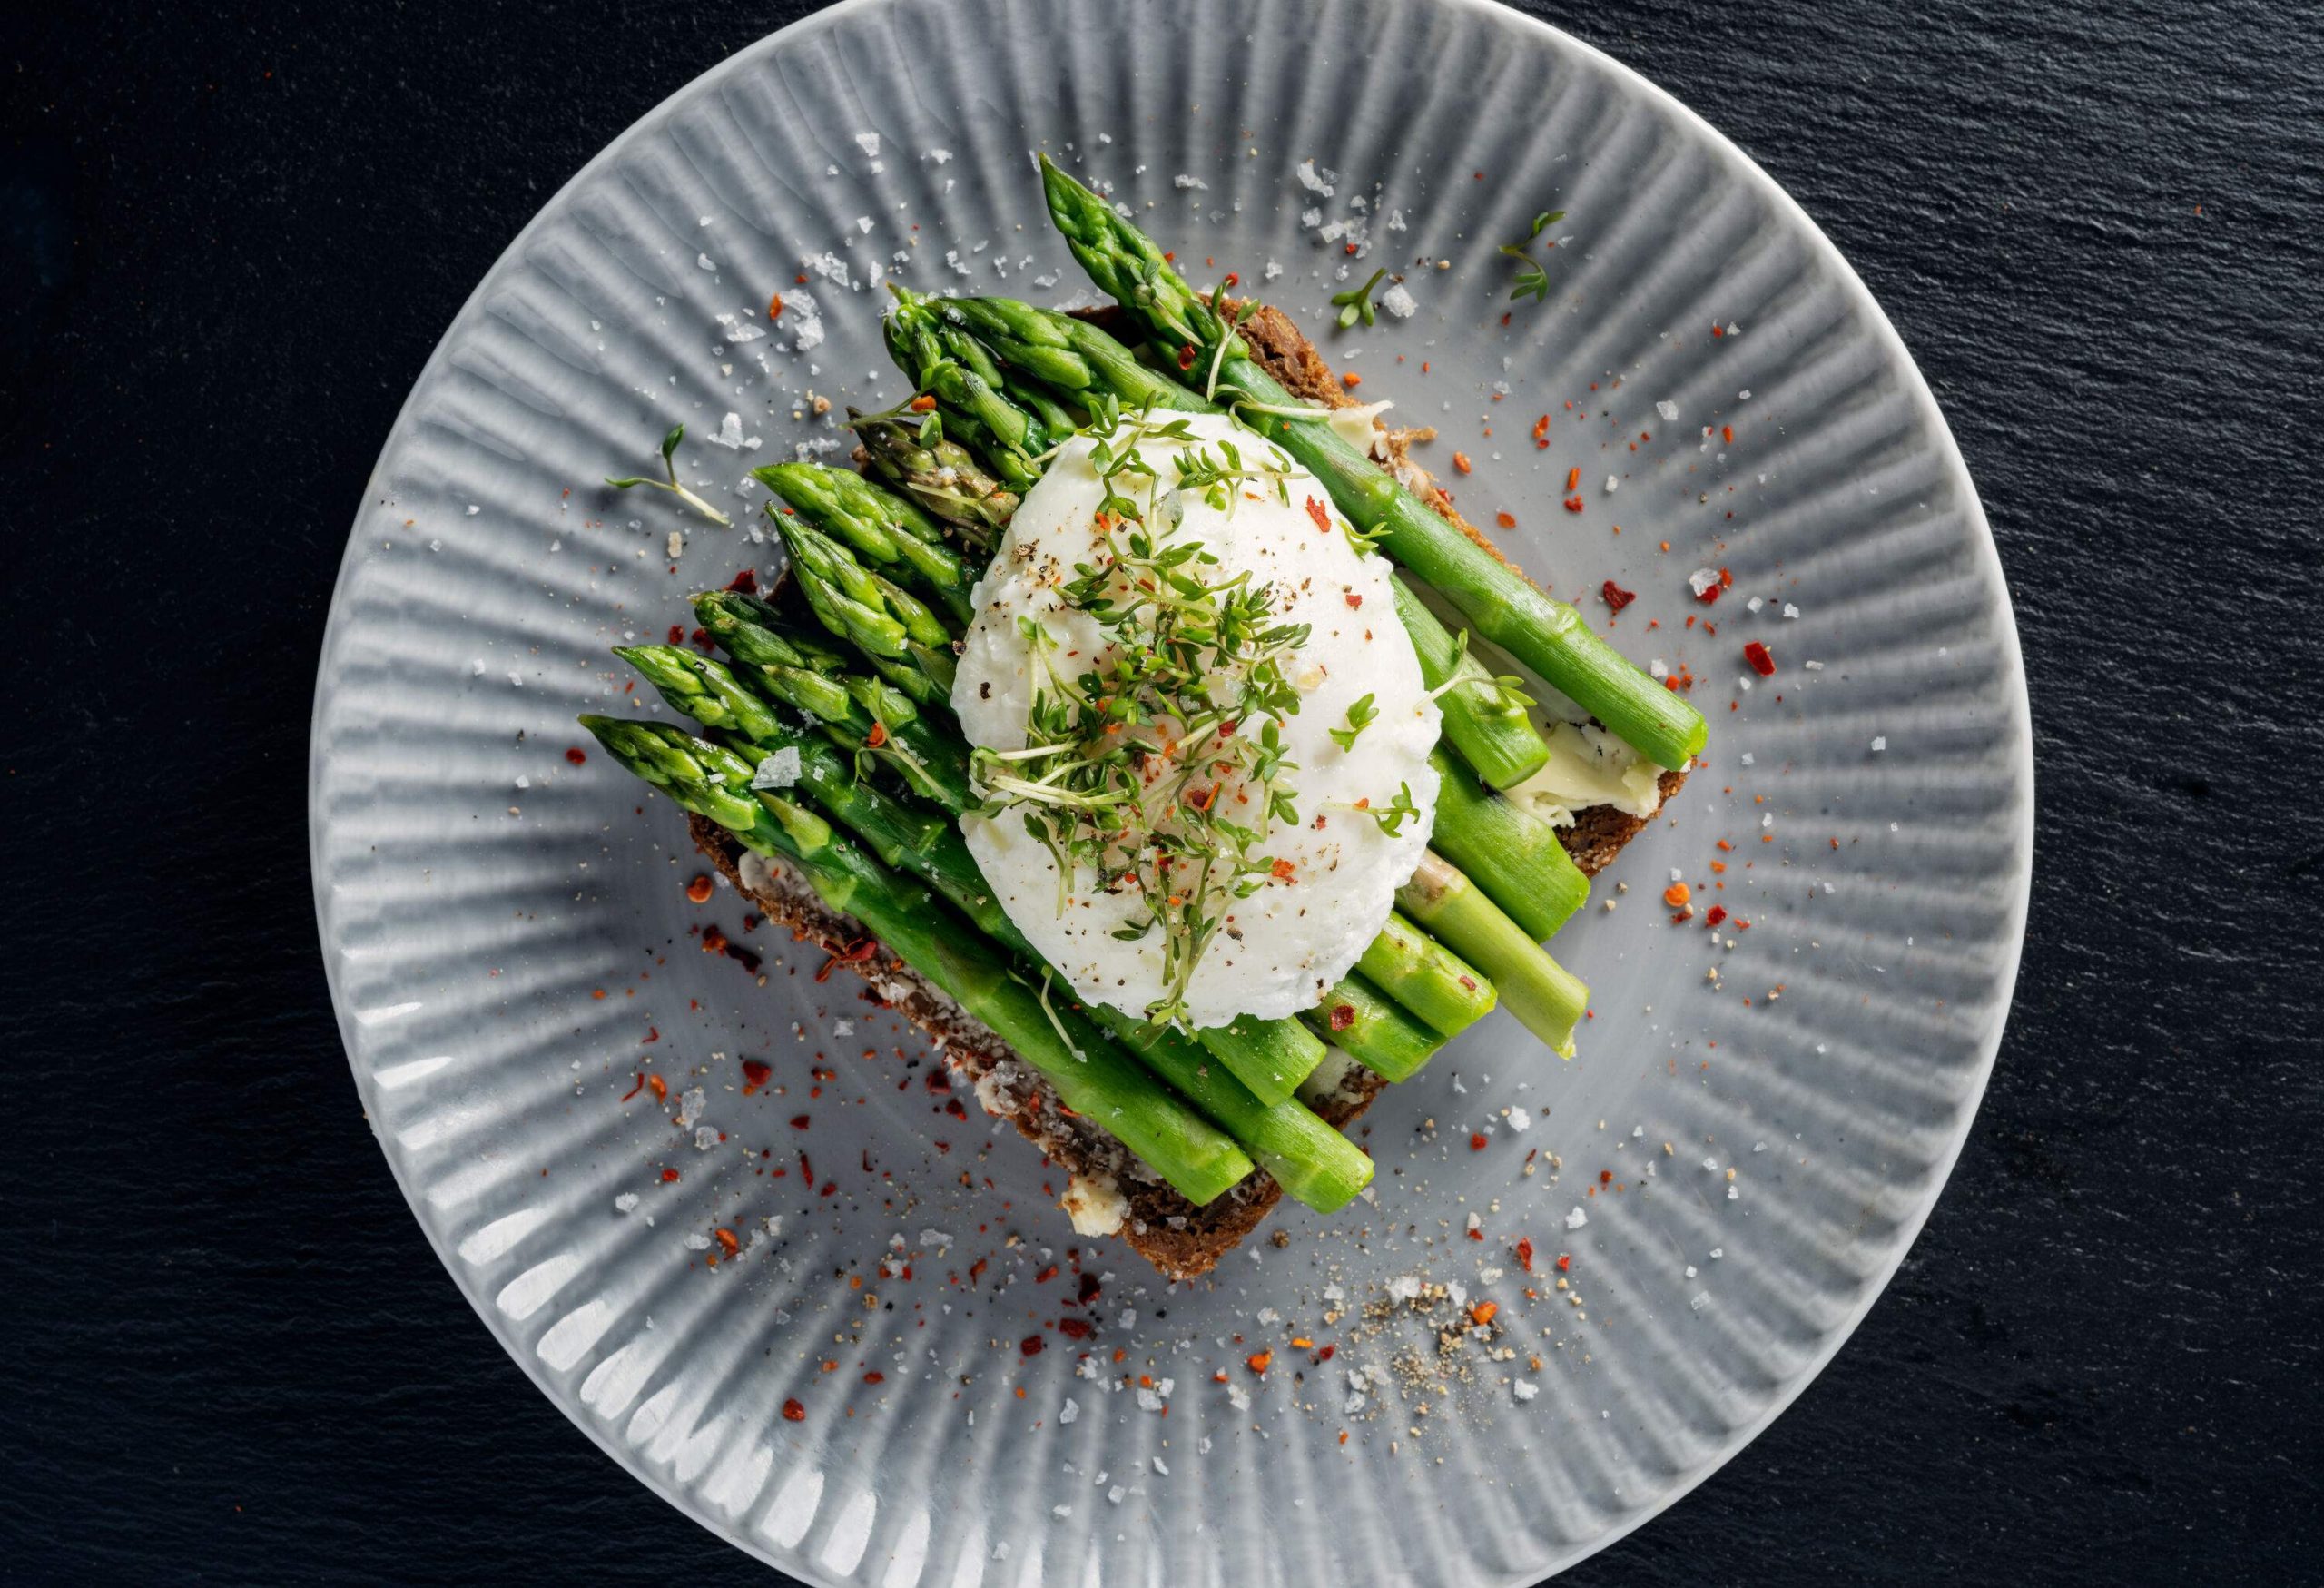 An open-faced sandwich topped with green asparagus and a poached egg garnished on a plate.